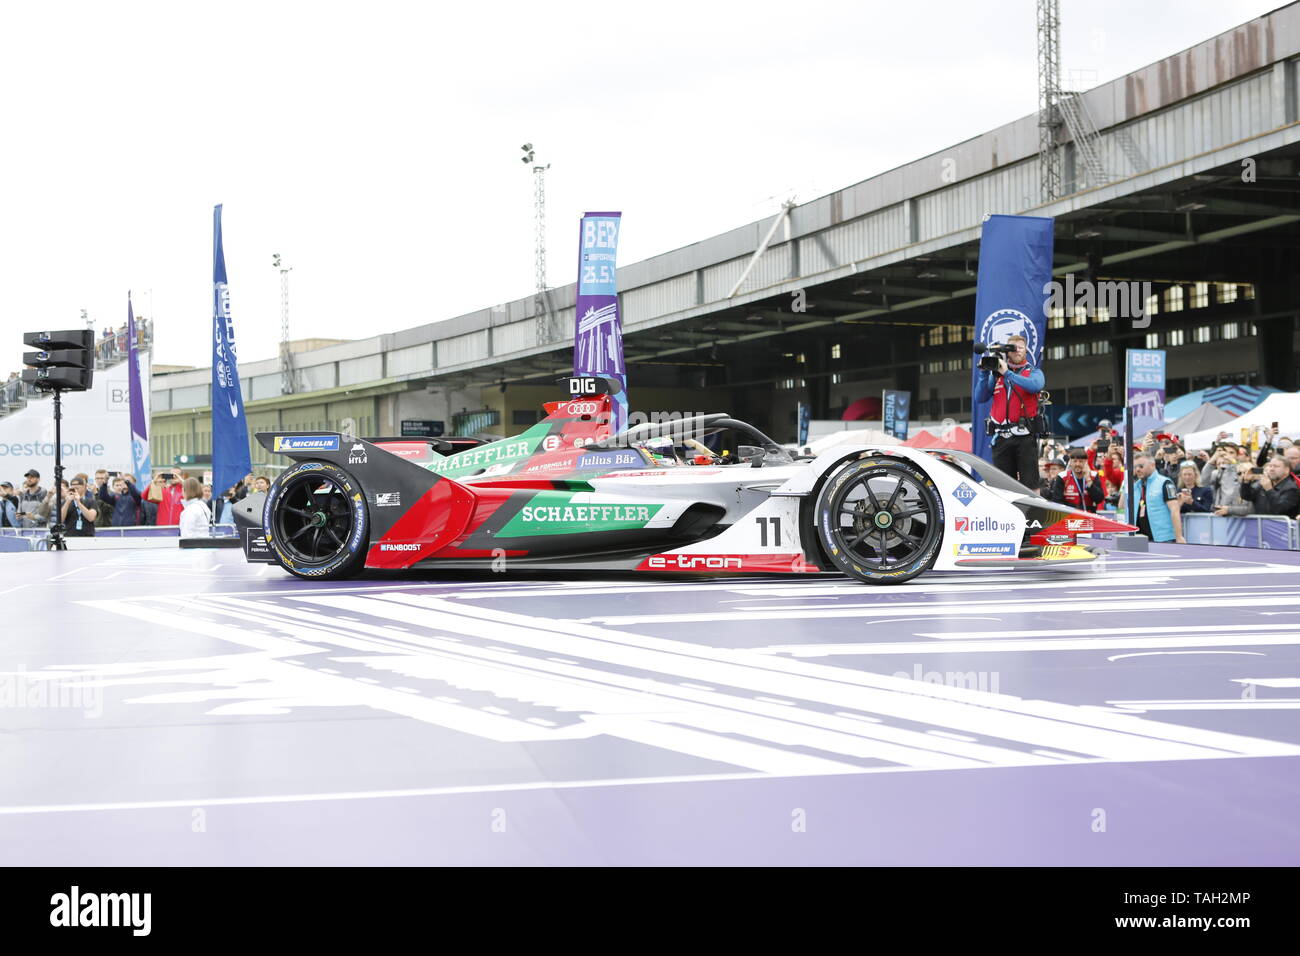 25.05.2019, Berlin, Germany. Lucas Di Grassi at the race. Lucas Di Grassi from the Audi Sport Abt Schaeffler team wins the Berlin ePrix. Sébastien Buemi from the team Nissan e.dams wins the second place and Jean-Eric Vergne from the team DS TECHEETAH wins the third place. The Formula E will be on the 25th of May 2019 for the fifth time in Berlin. The electric racing series 2018/2018 will take place at the former Tempelhof Airport. Stock Photo